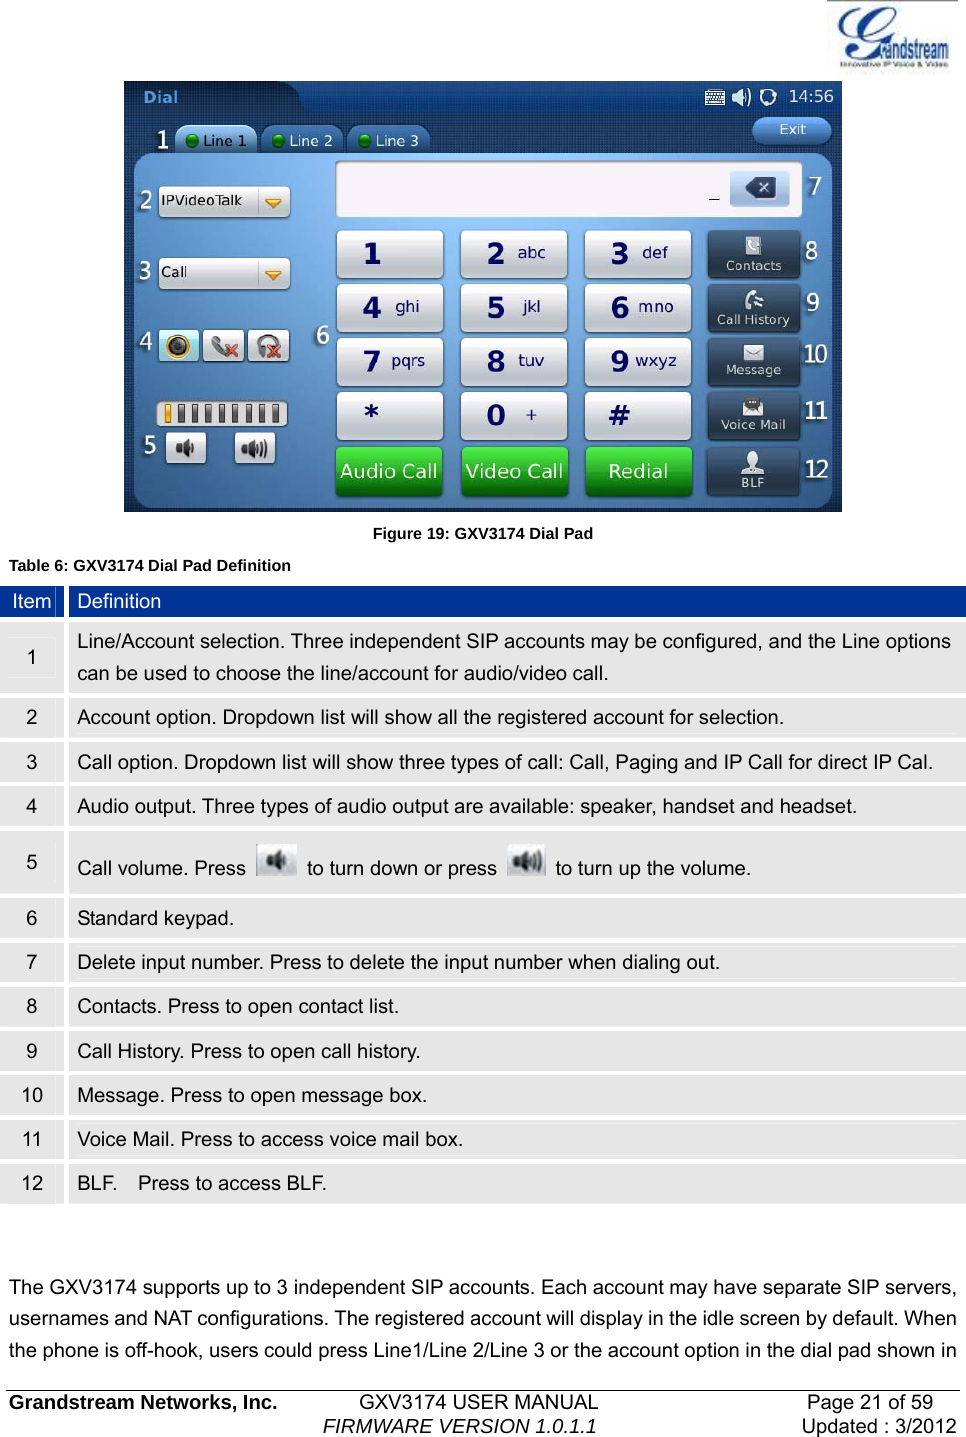   Grandstream Networks, Inc.        GXV3174 USER MANUAL                     Page 21 of 59                                FIRMWARE VERSION 1.0.1.1  Updated : 3/2012   Figure 19: GXV3174 Dial Pad Table 6: GXV3174 Dial Pad Definition Item  Definition 1  Line/Account selection. Three independent SIP accounts may be configured, and the Line options can be used to choose the line/account for audio/video call. 2  Account option. Dropdown list will show all the registered account for selection. 3  Call option. Dropdown list will show three types of call: Call, Paging and IP Call for direct IP Cal. 4  Audio output. Three types of audio output are available: speaker, handset and headset. 5  Call volume. Press    to turn down or press    to turn up the volume. 6  Standard keypad. 7  Delete input number. Press to delete the input number when dialing out. 8  Contacts. Press to open contact list. 9  Call History. Press to open call history. 10  Message. Press to open message box. 11  Voice Mail. Press to access voice mail box. 12  BLF.  Press to access BLF.   The GXV3174 supports up to 3 independent SIP accounts. Each account may have separate SIP servers, usernames and NAT configurations. The registered account will display in the idle screen by default. When the phone is off-hook, users could press Line1/Line 2/Line 3 or the account option in the dial pad shown in 